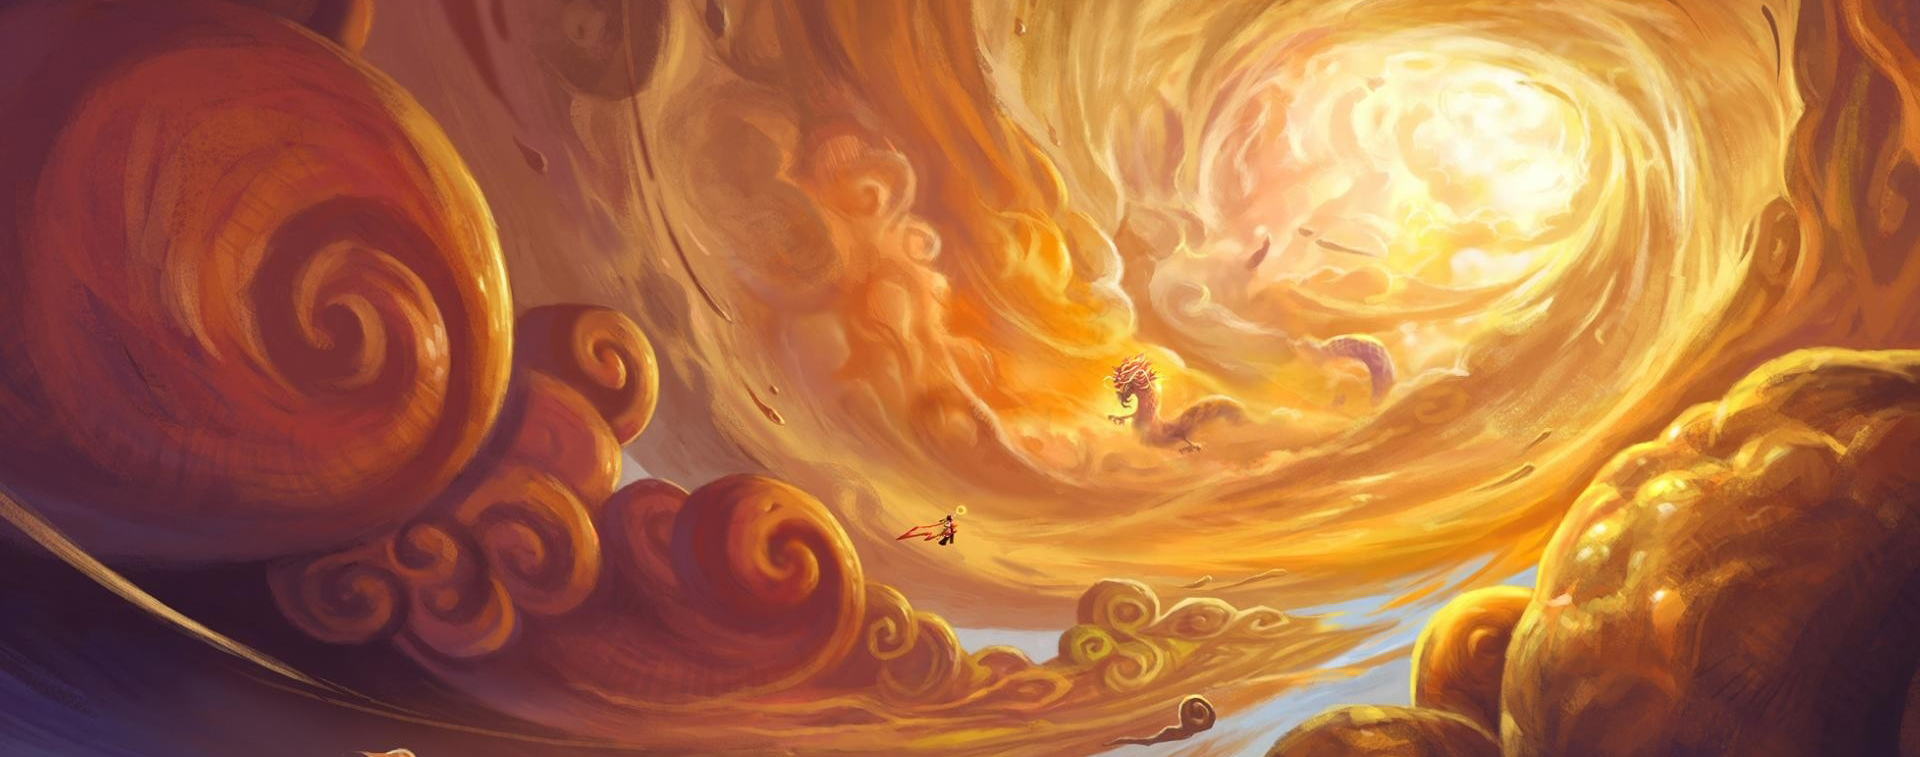 1001-dragon-in-the-orange-clouds-banner